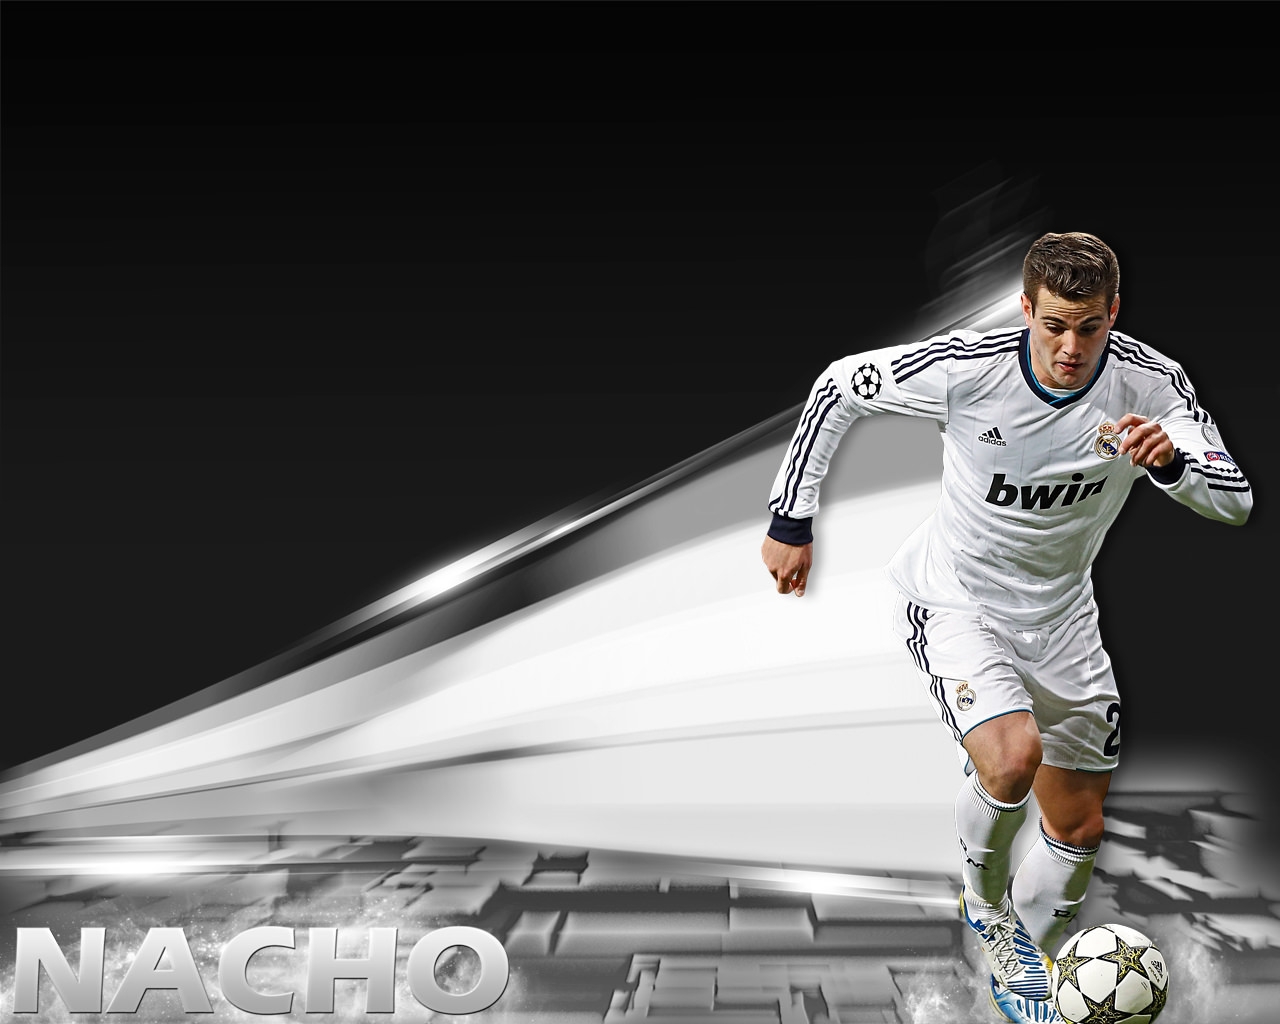 Awesome Nacho Real Madrid Wallpaper Great Foofball Club